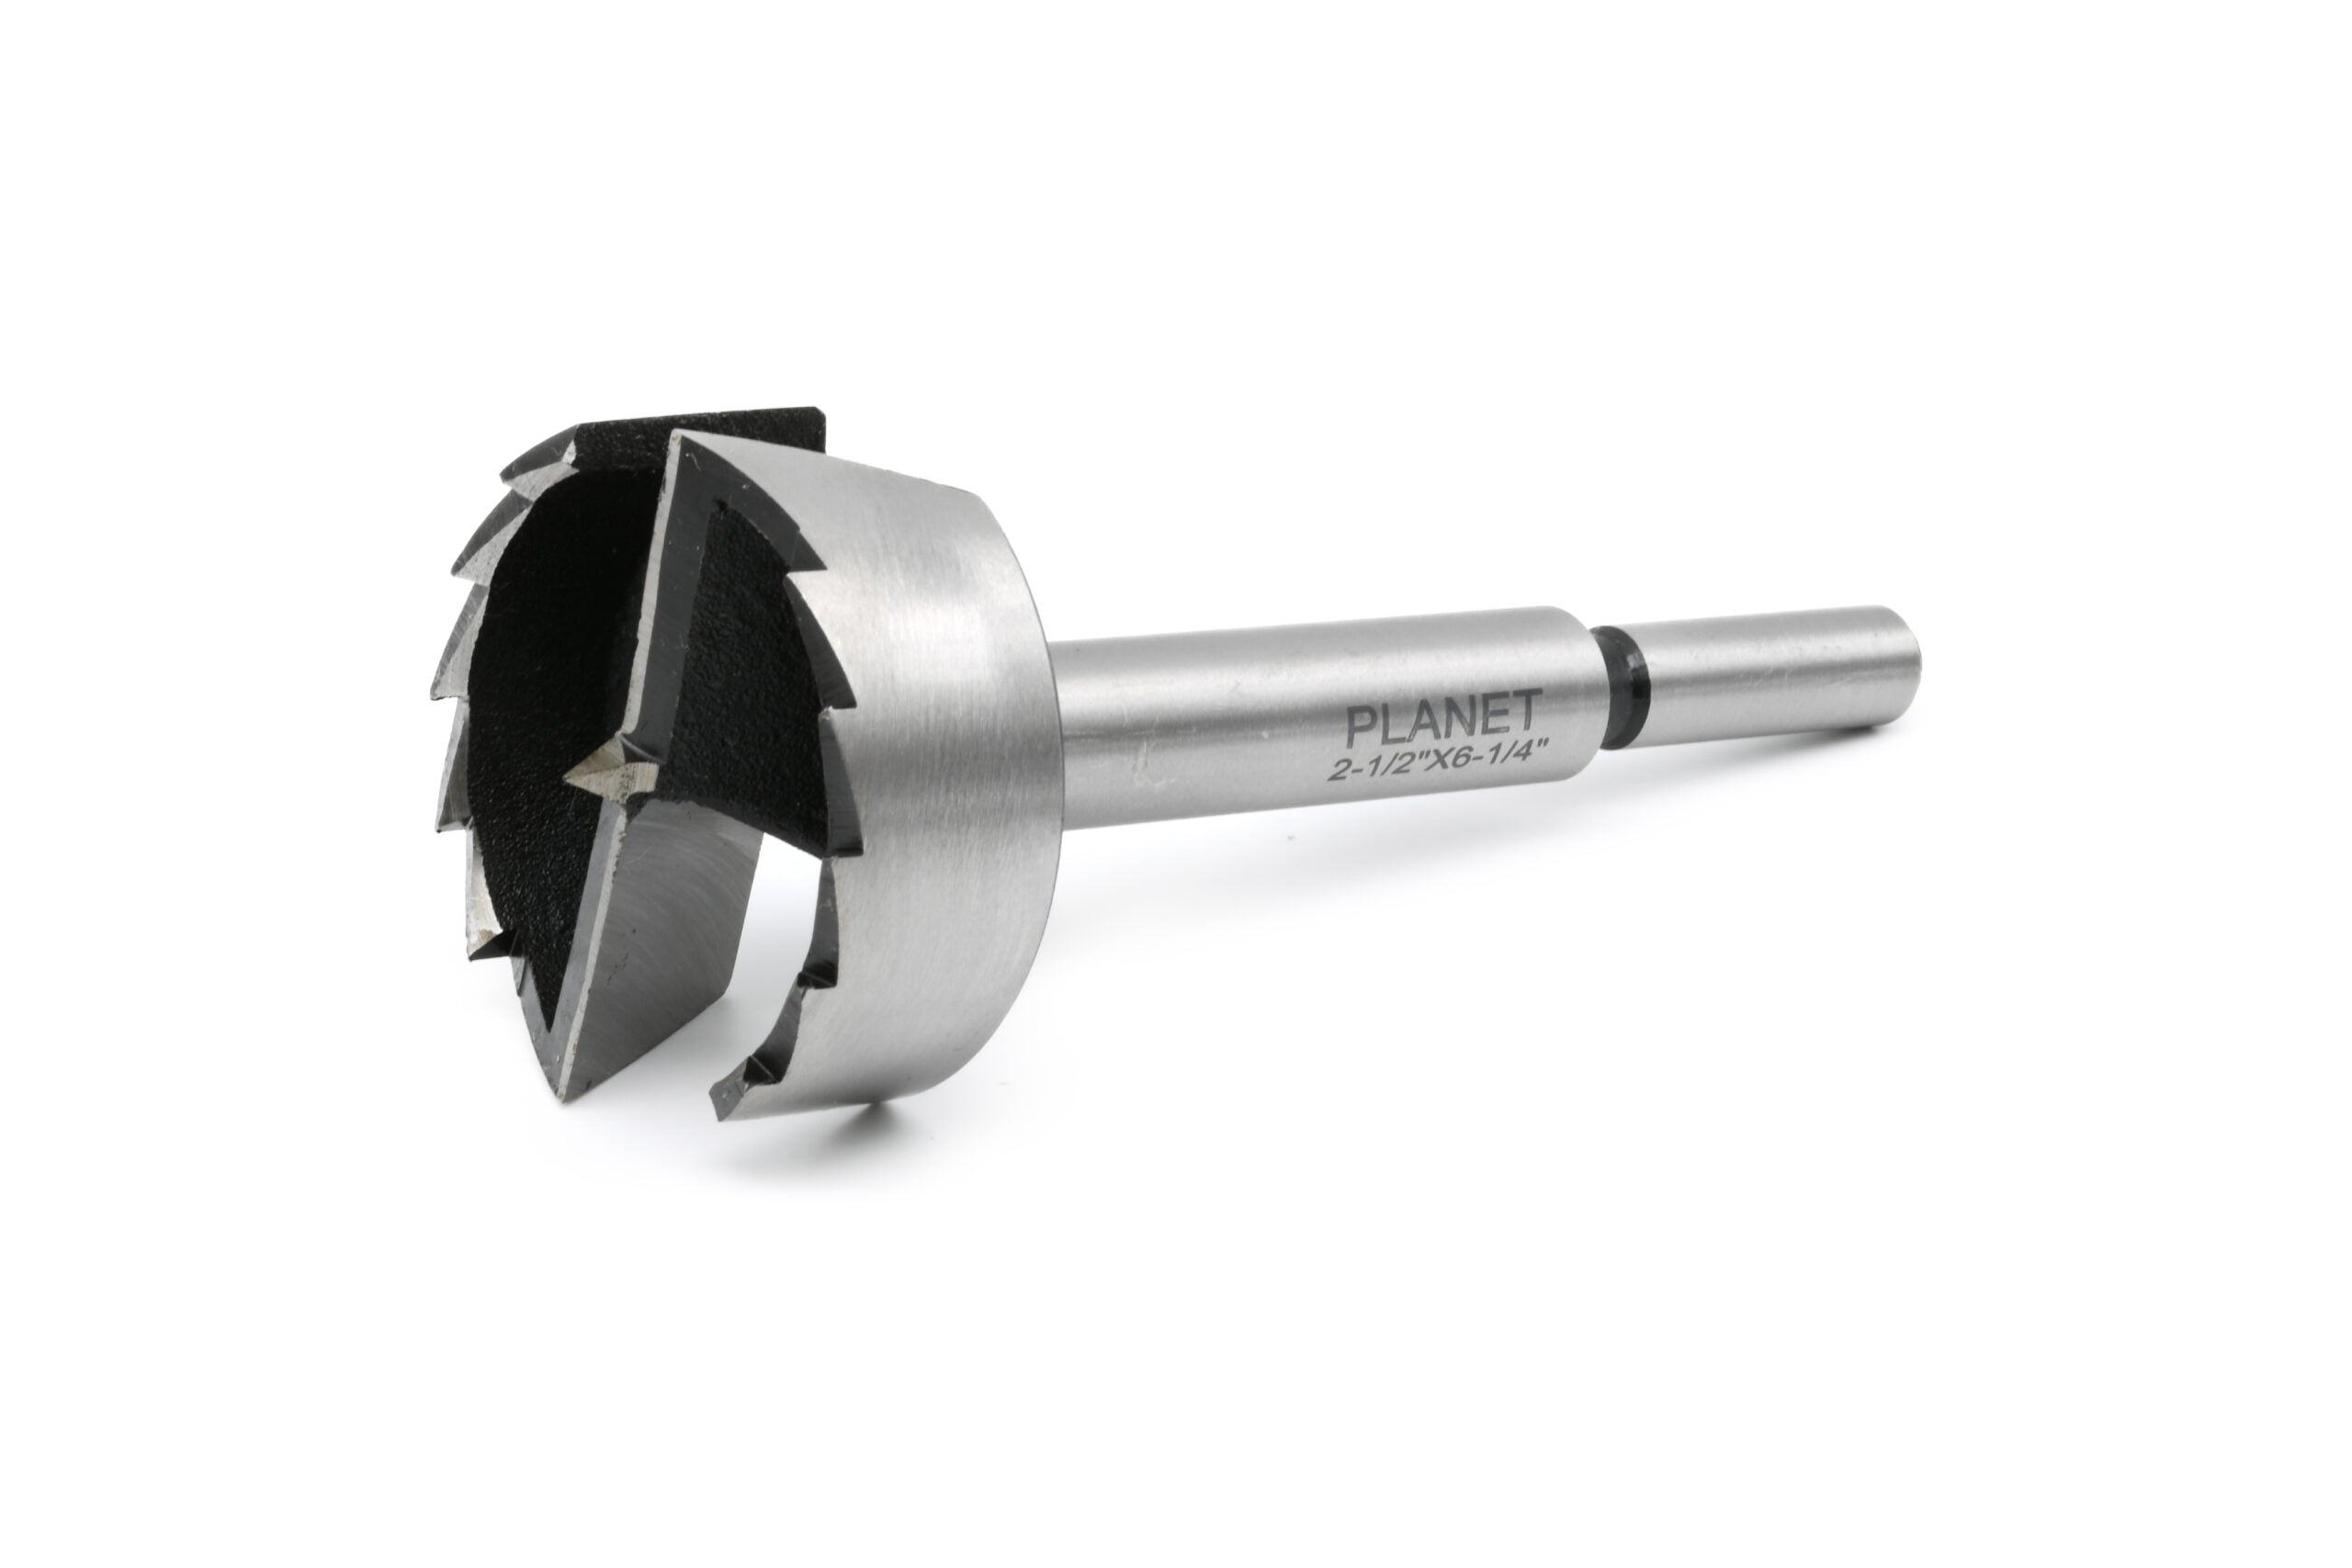 Planet Long Series Saw Tooth Forstner Bit 2-3/4" 69.85mm